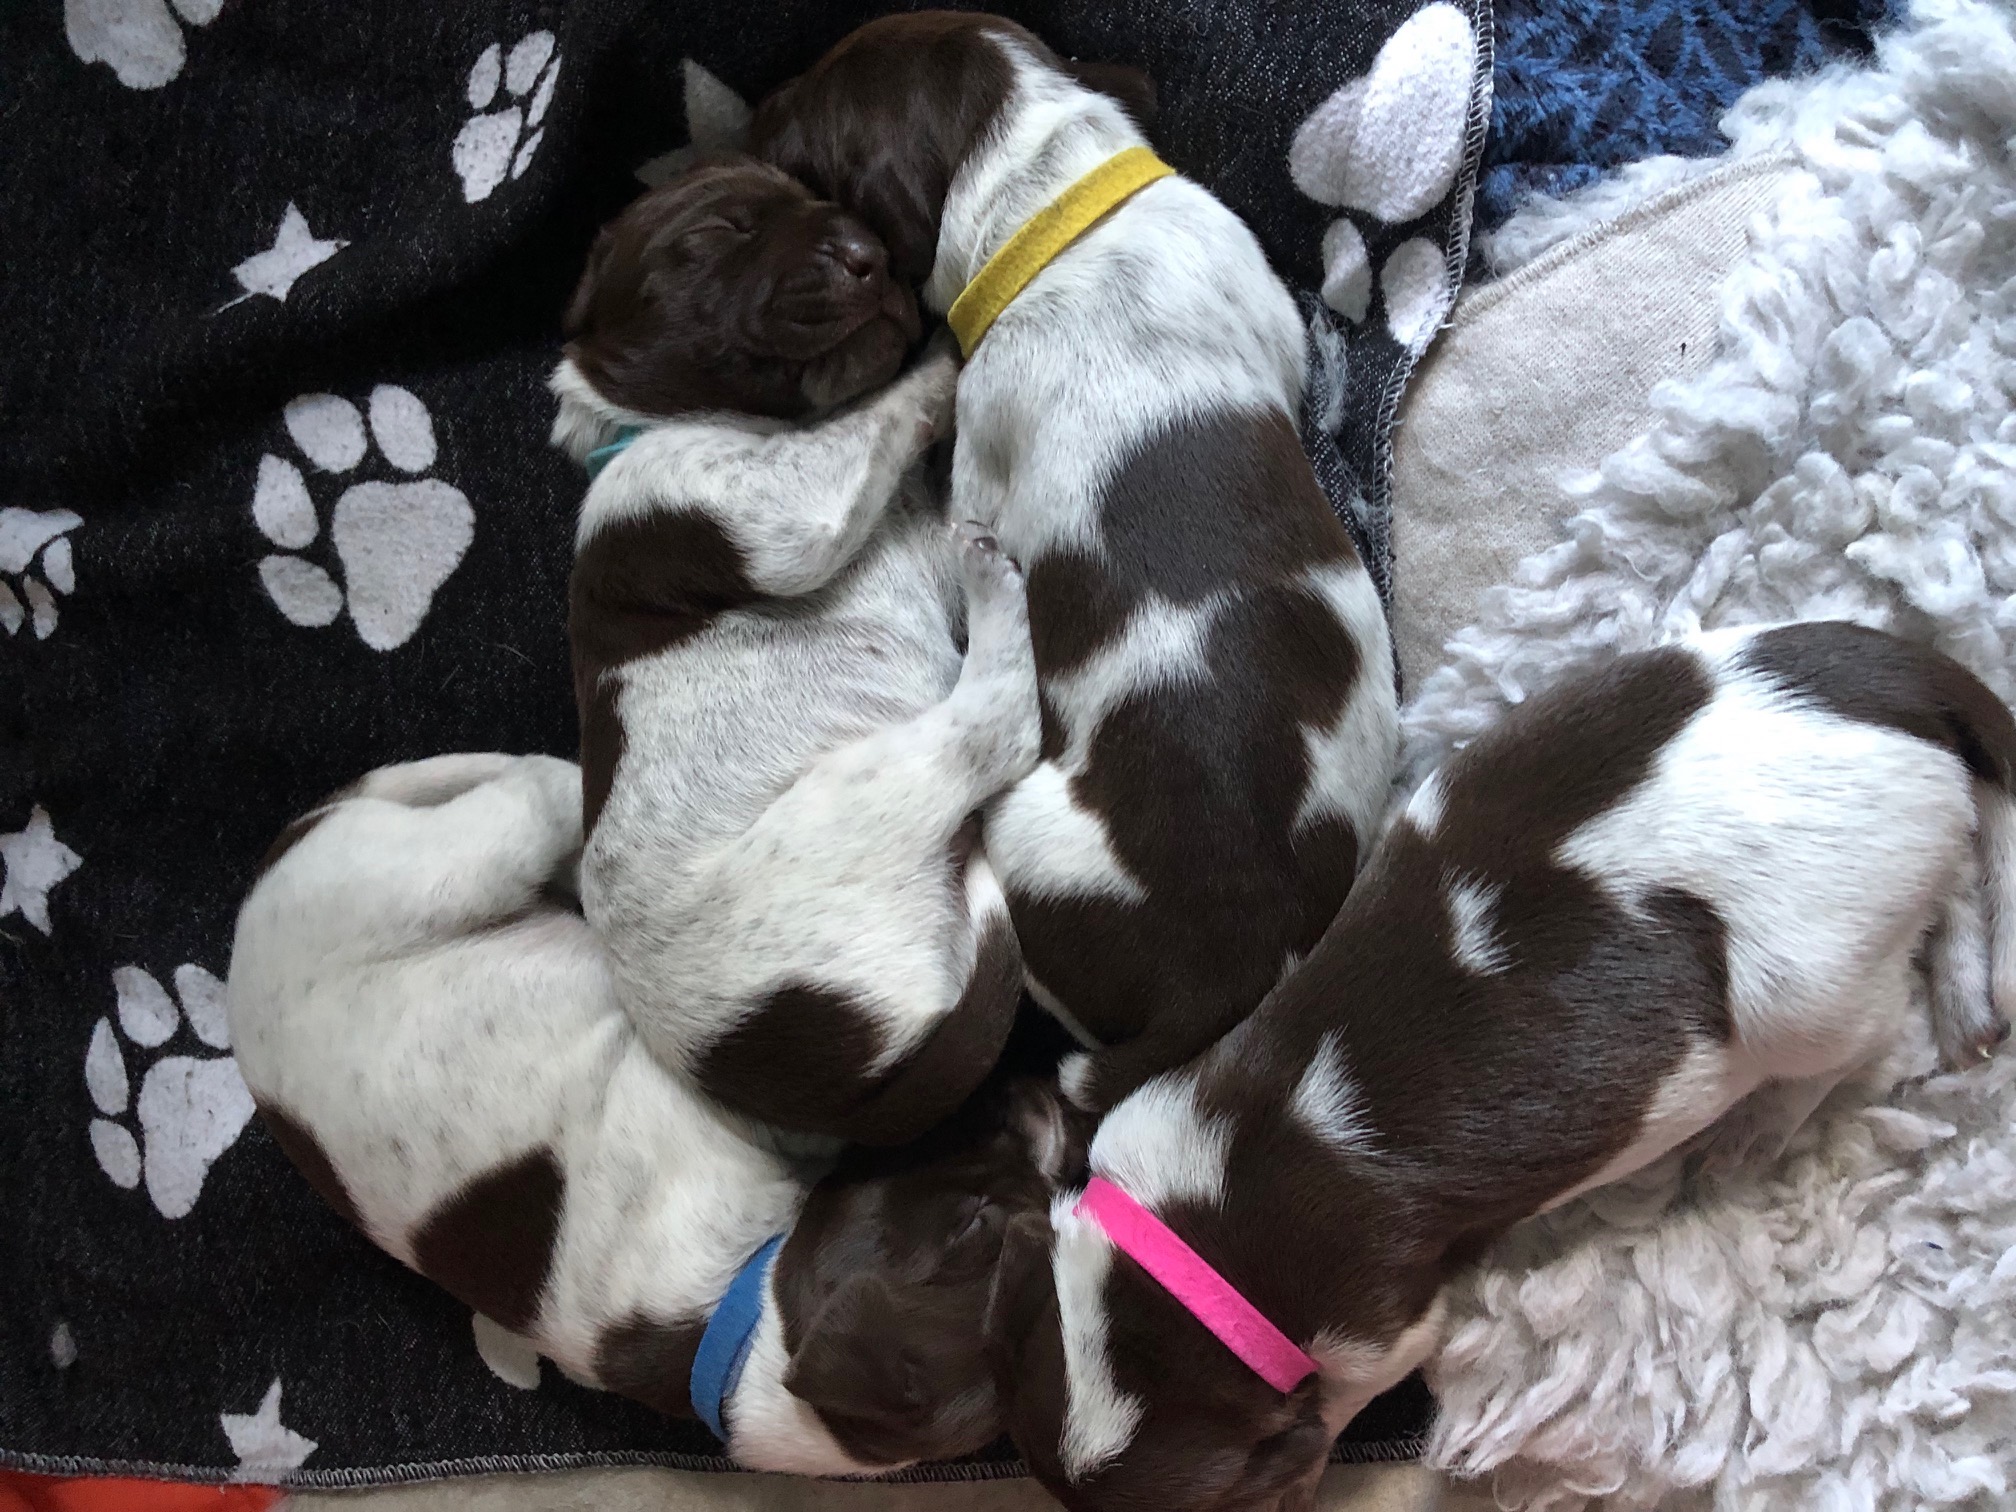 Ada's pups at 10 days old